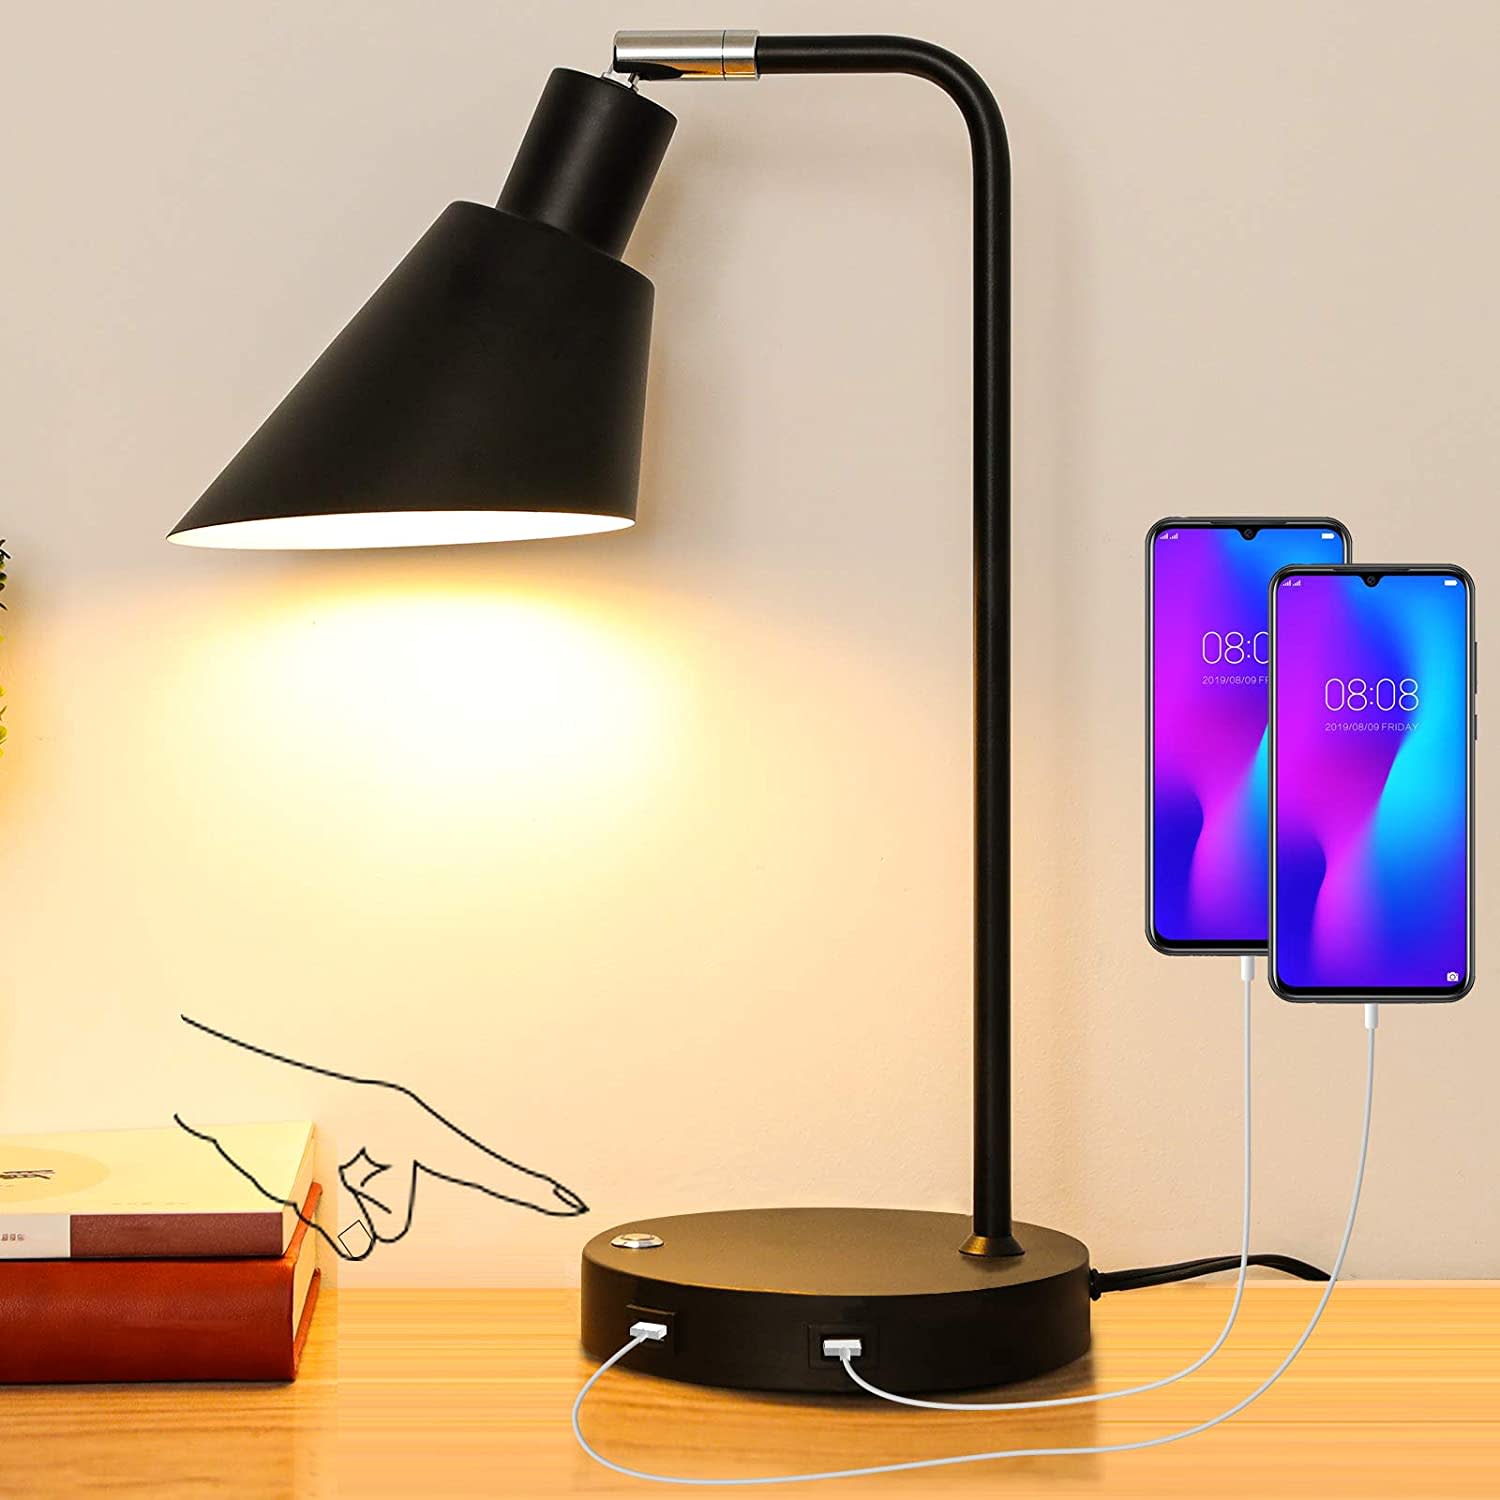 12 Best Bedside Lamps for Book Lovers 2022 | Apartment Therapy